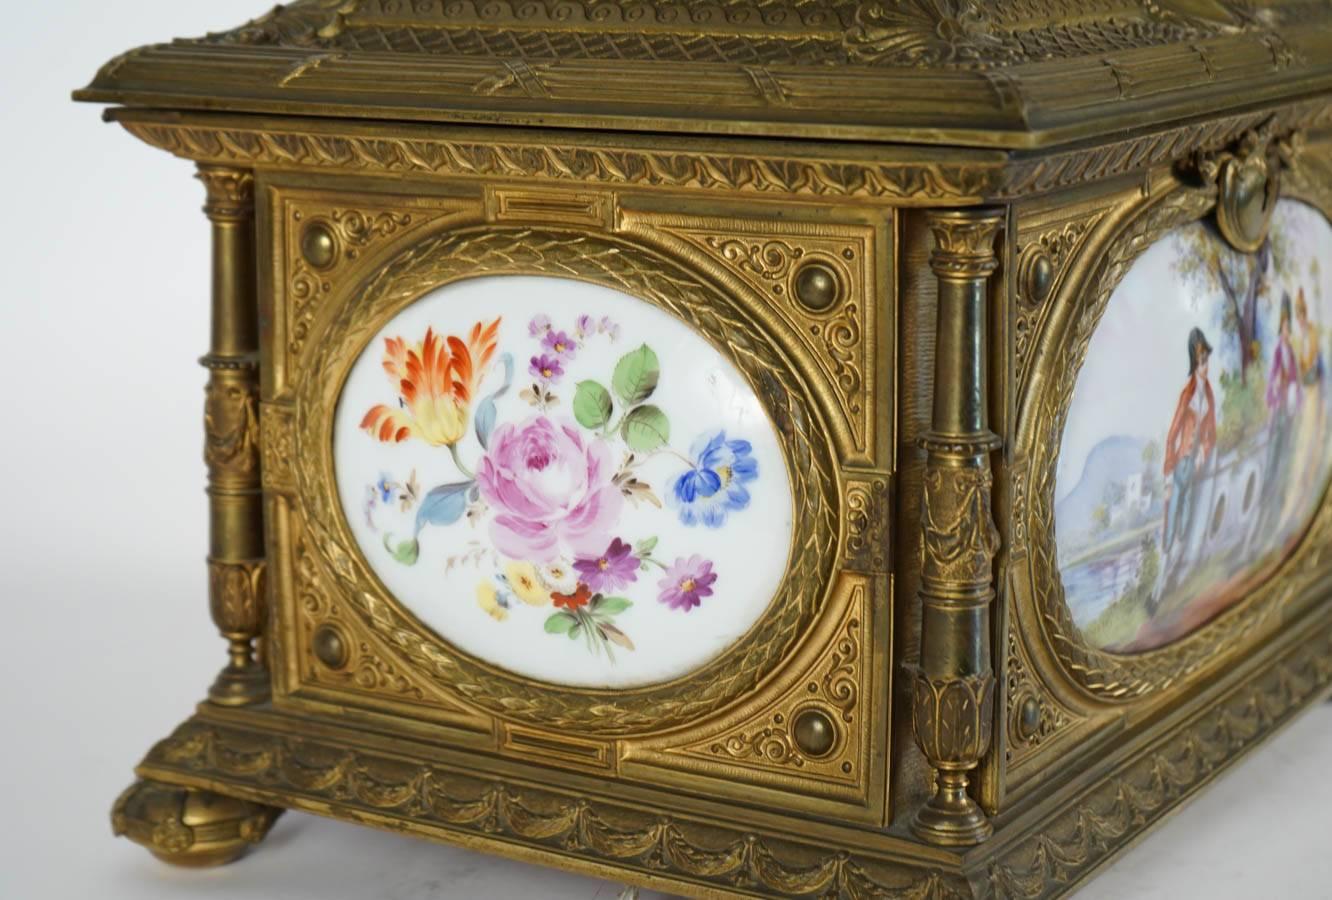 19th Century Sevres Porcelain Gilt Bronze Mounted Jewelry Box Casket For Sale